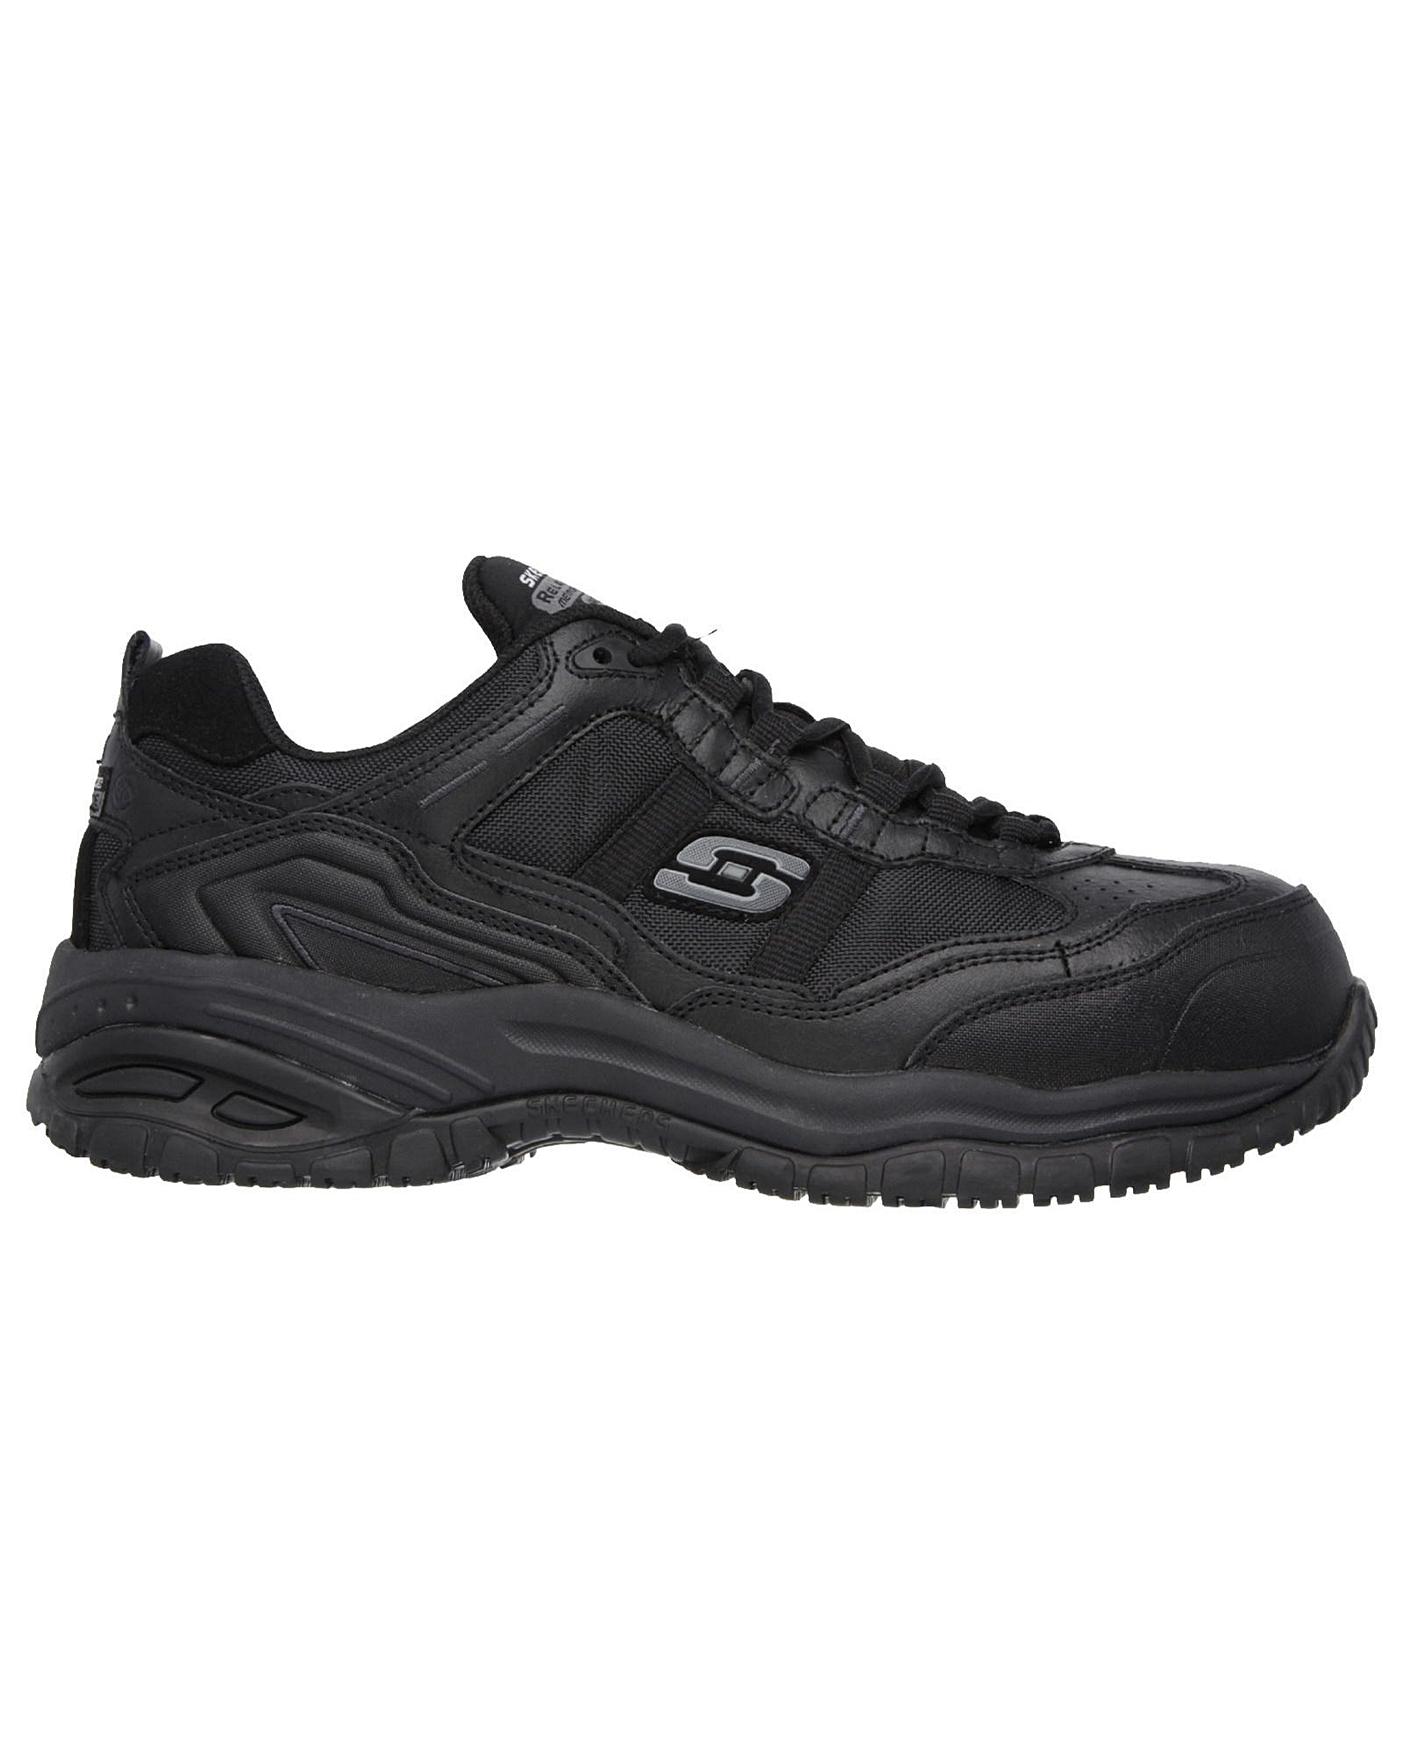 skecher safety shoes